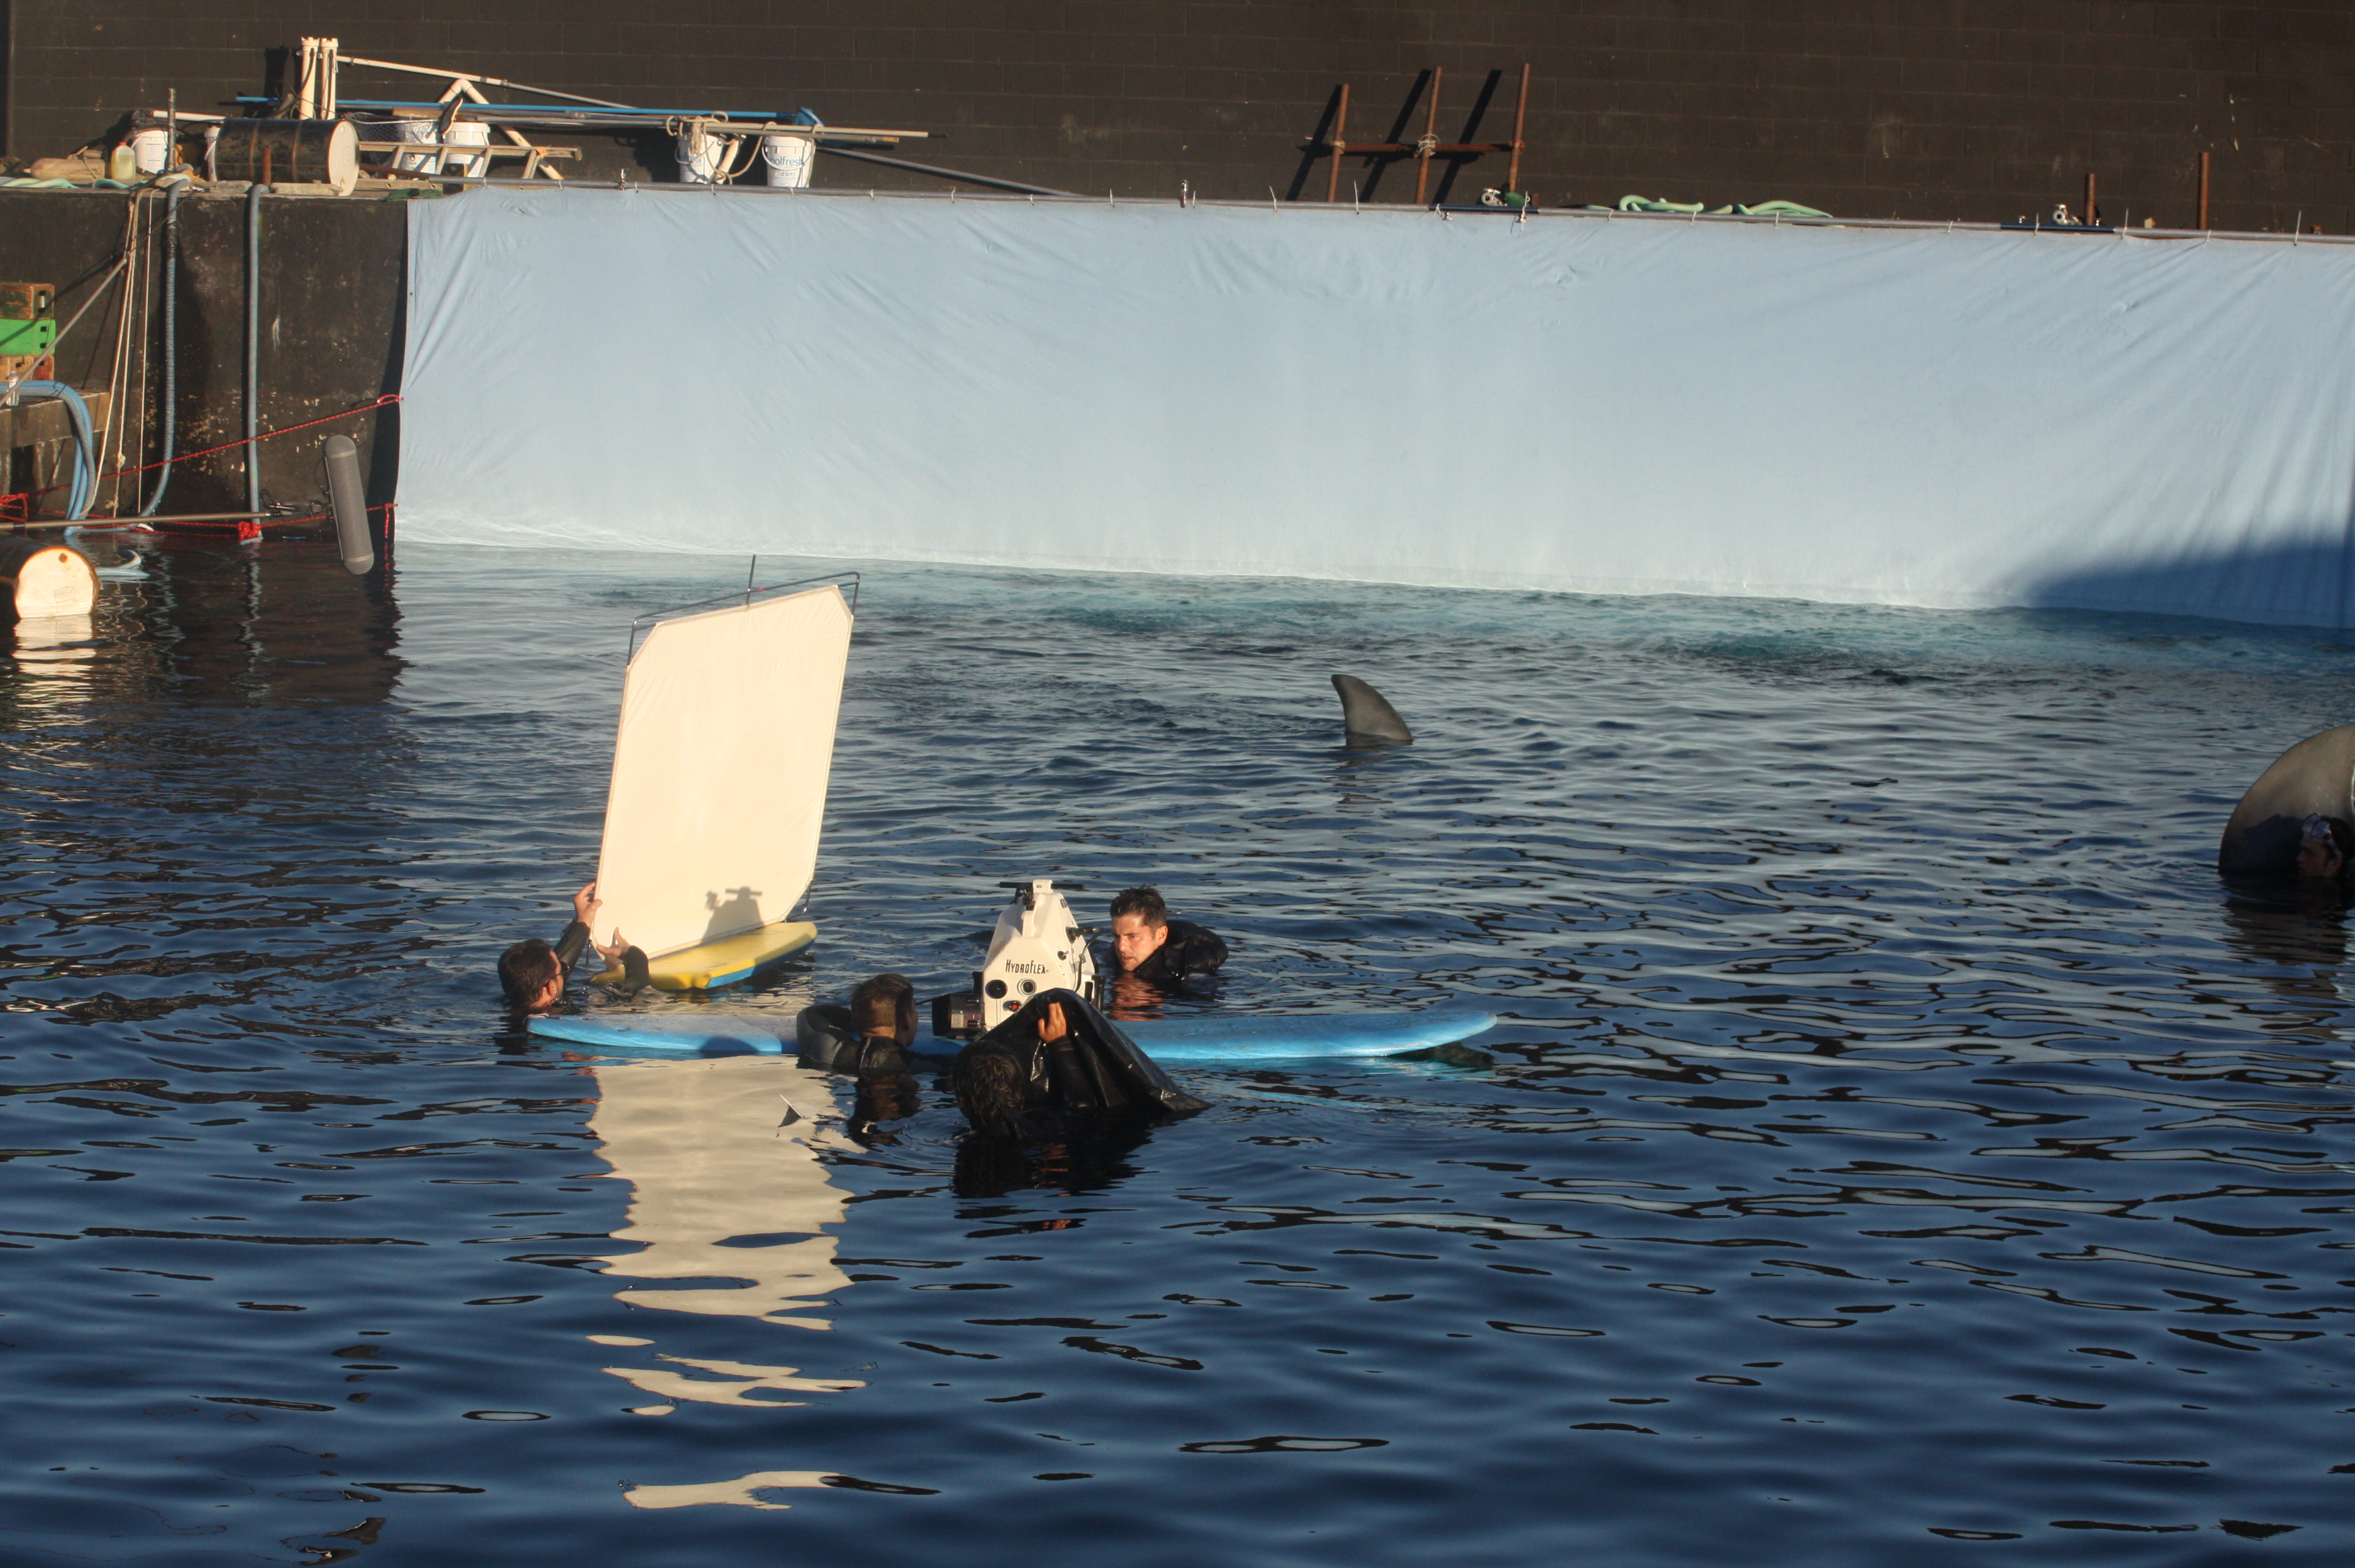 Actor Rich Handley is stranded in the middle of shark infested waters in the South Pacific for the film, Indianapolis.